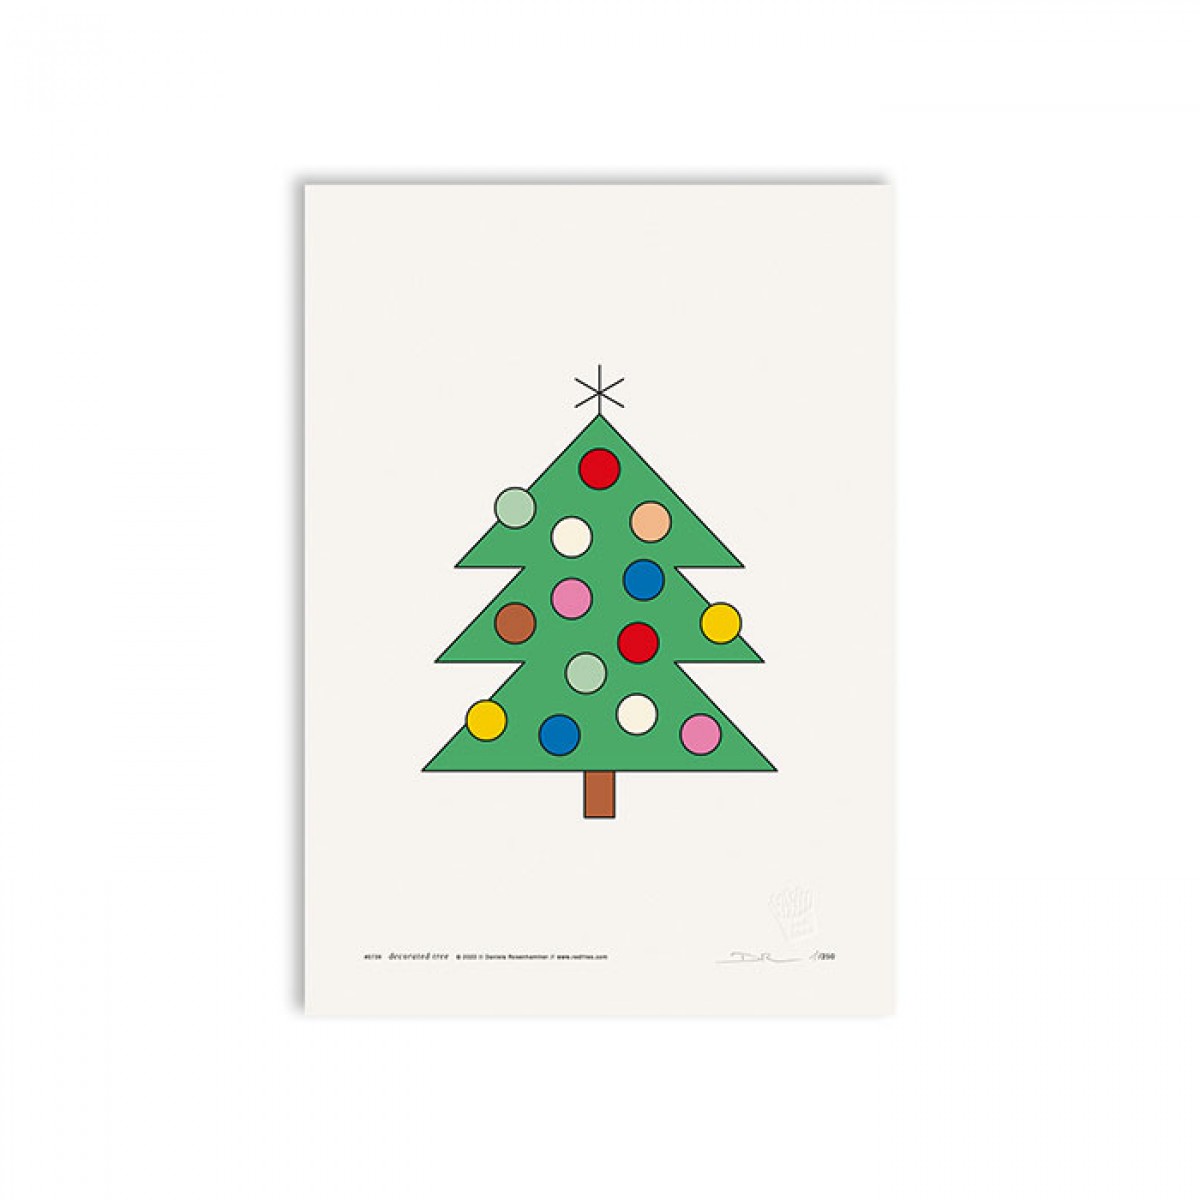 redfries decorated tree white a3 – Kunstdruck DIN A3